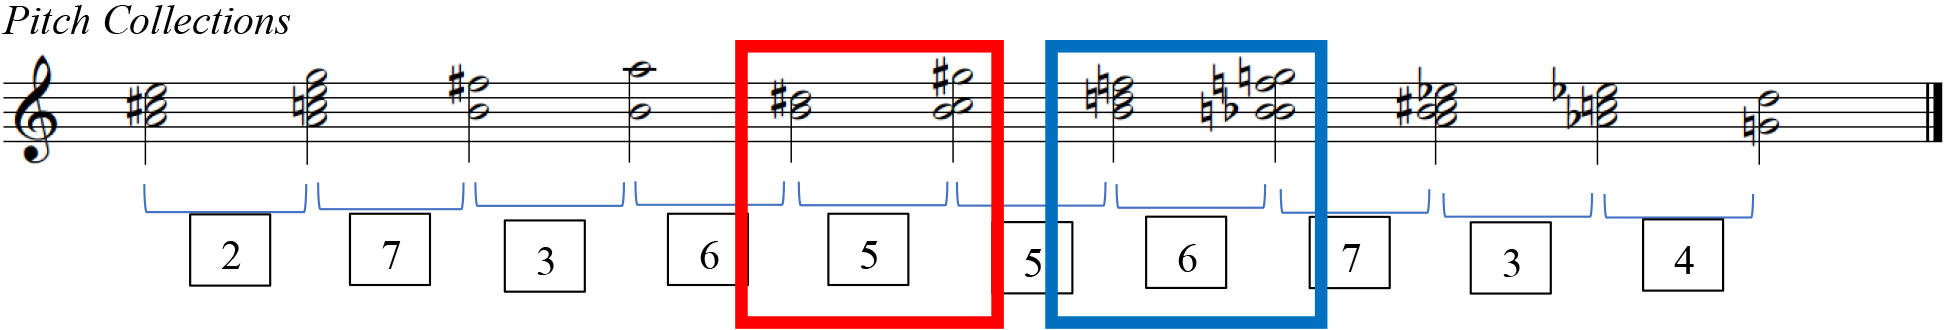 A staff labeled Pitch Collections with a treble clef containing notes and corresponding numbers between them. More in description below.